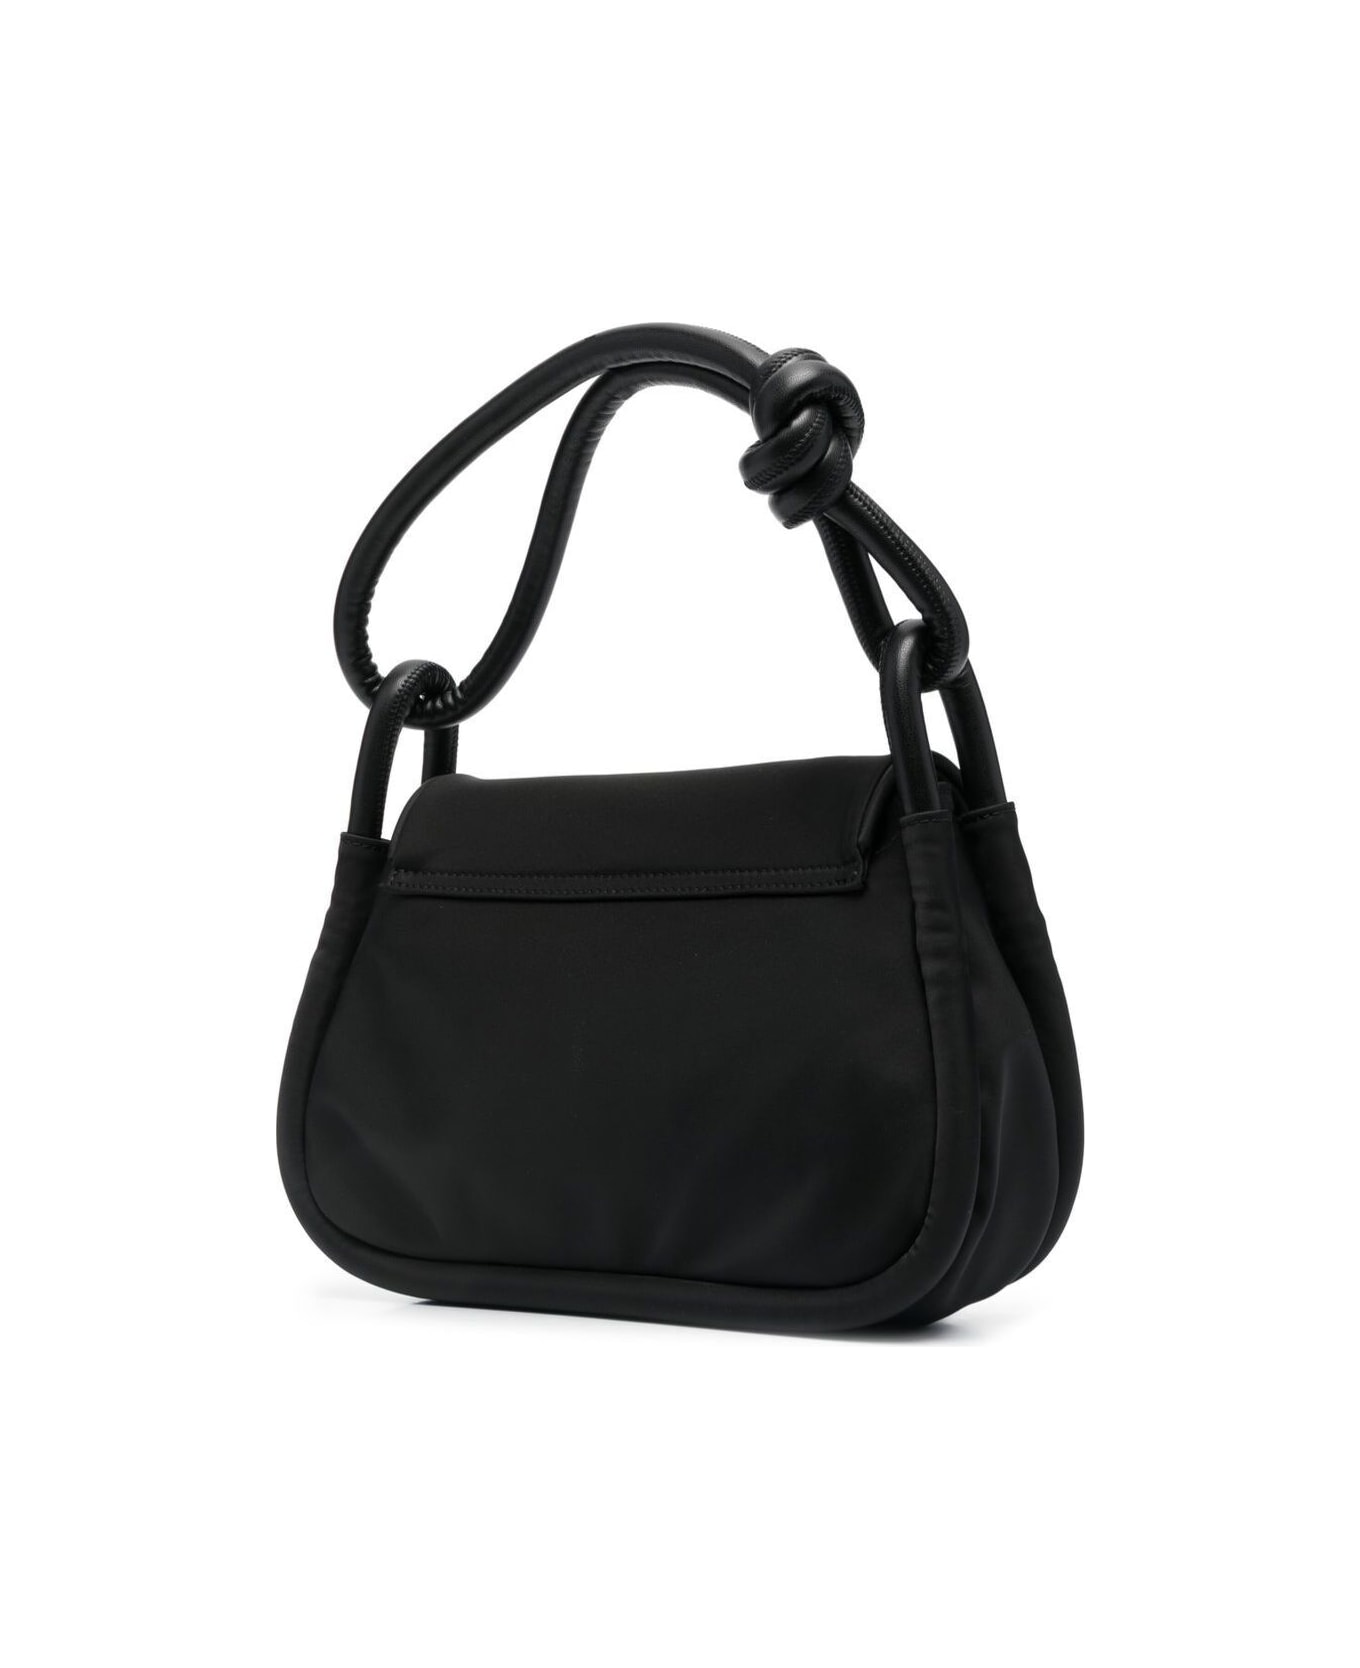 Ganni Black Knot Flap Over Tote Bag In Polyester Woman - Black